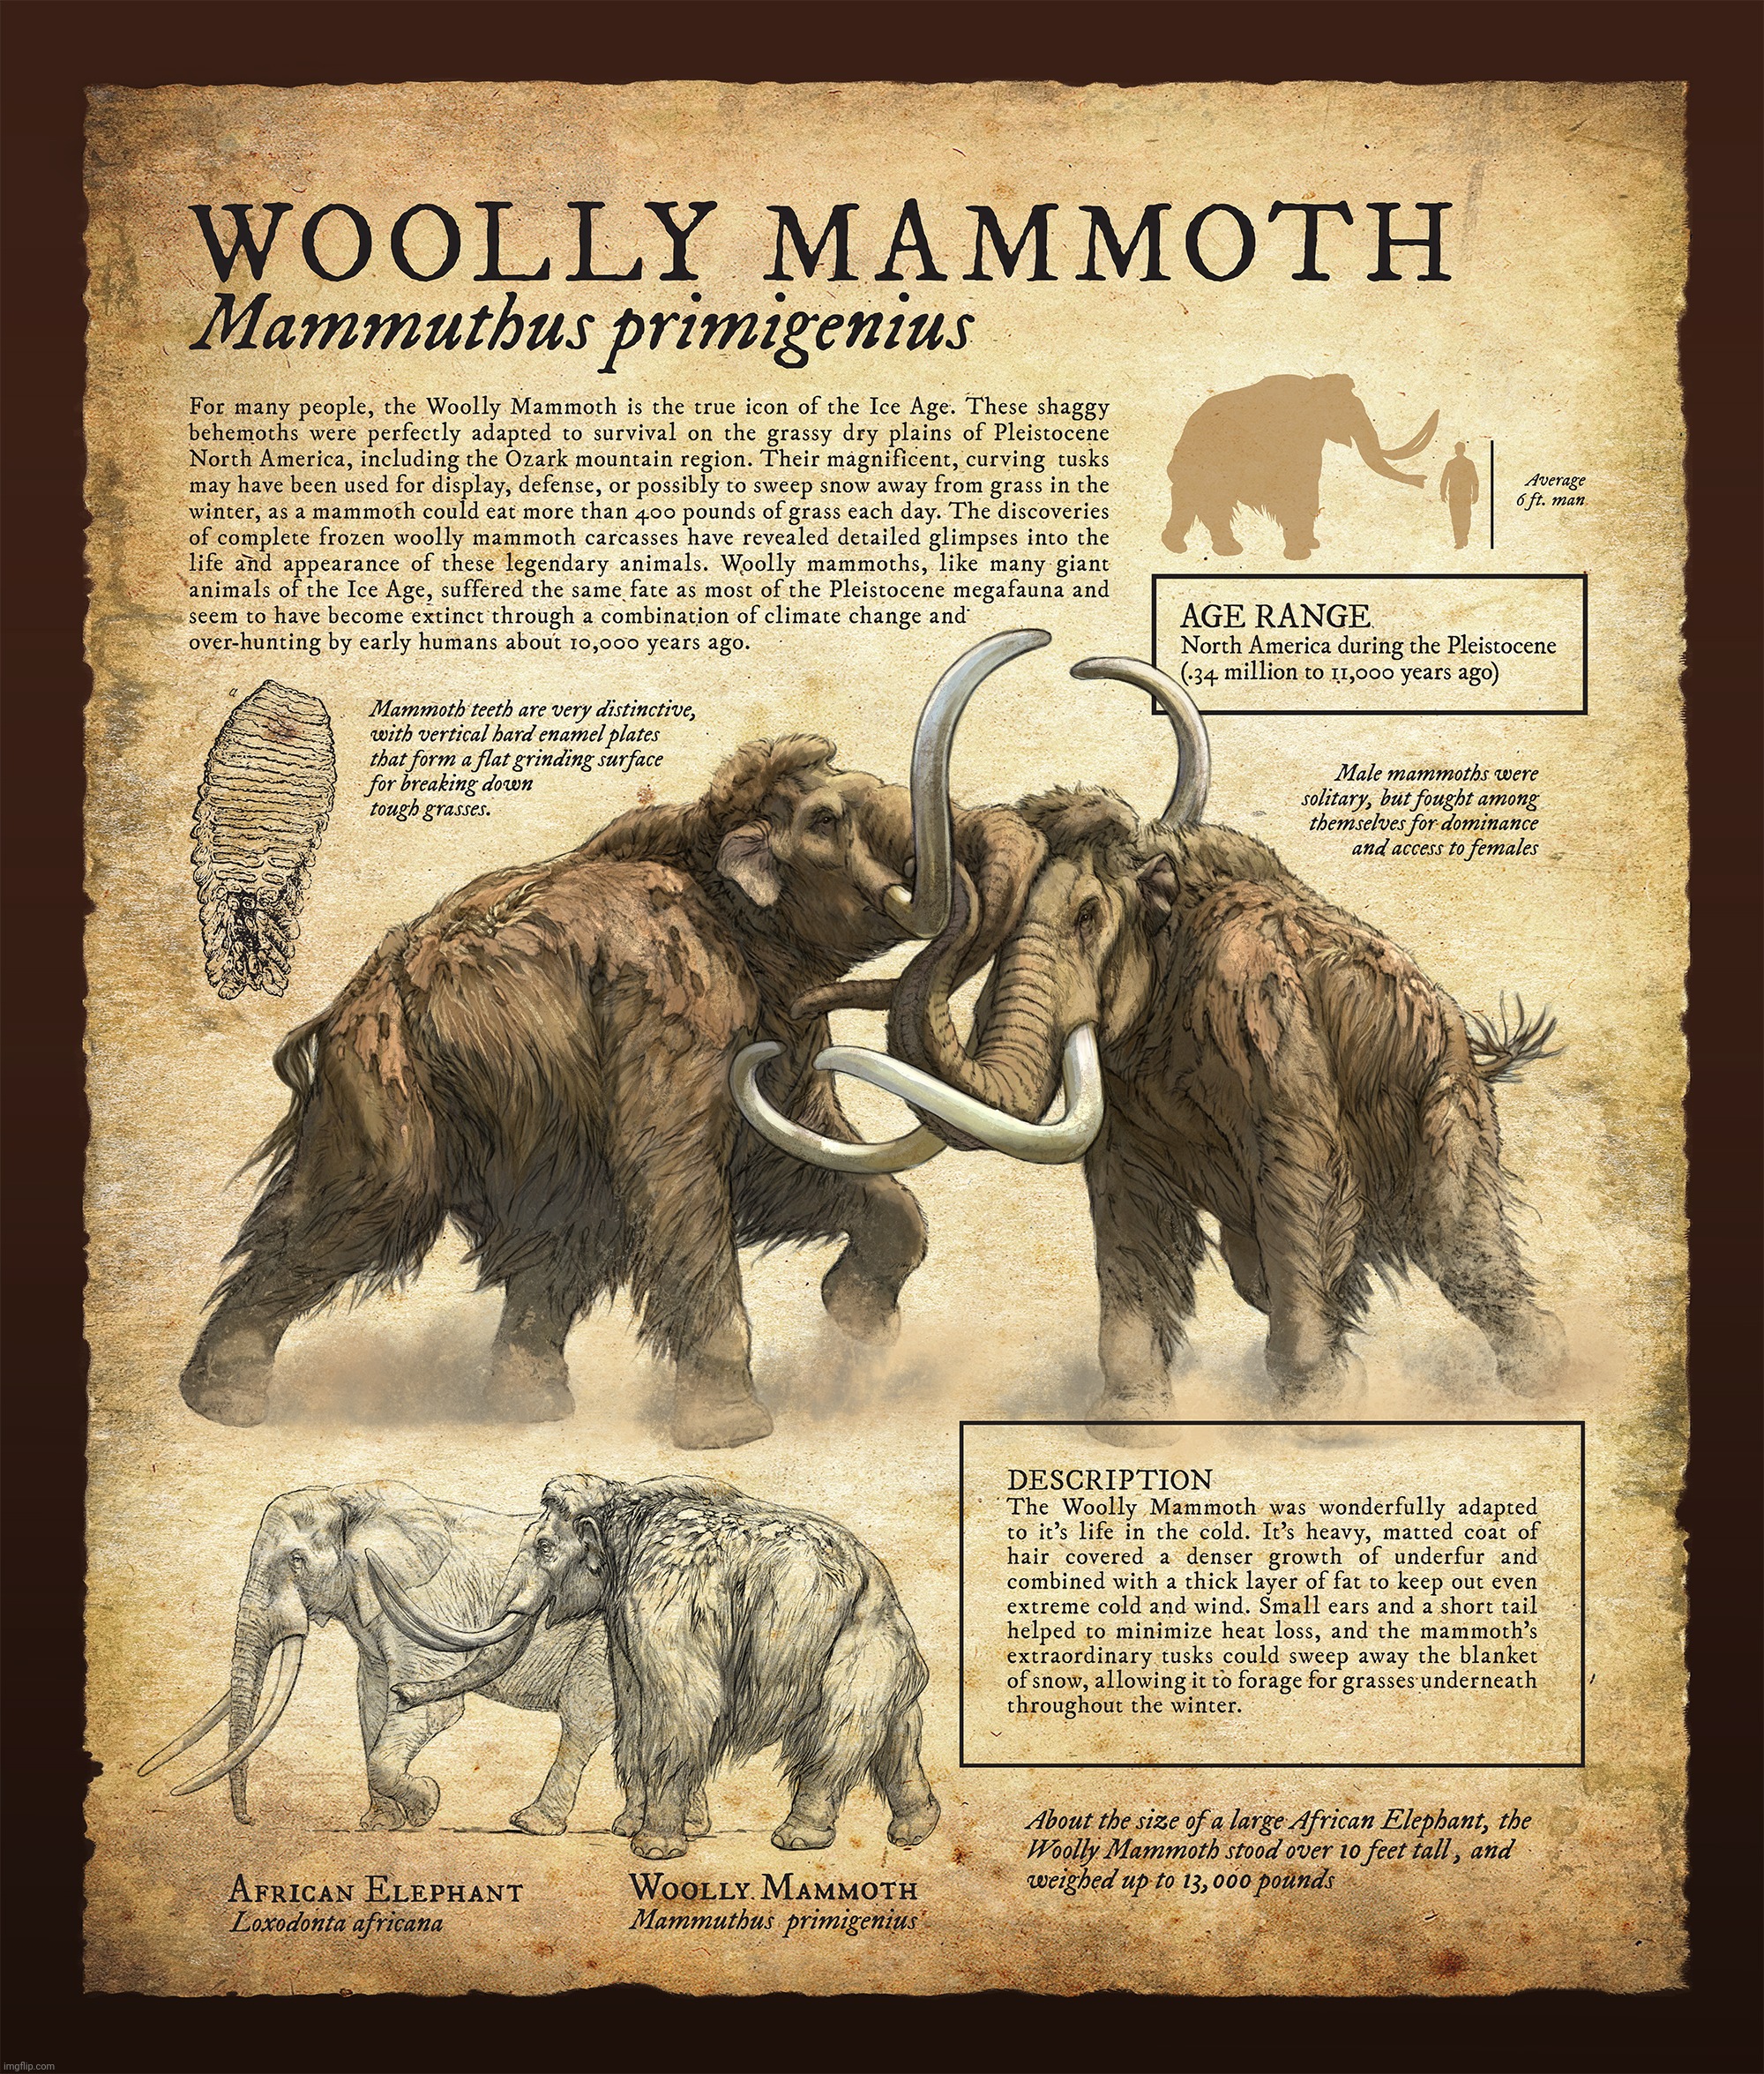 The Ice Age ended 10,000 years ago so Wooly Mammoths starved to death 6000 years later because they had no more ice to eat | image tagged in mammuthus primigenius,woolly mammoth,eaten to extinction,went extinct 4000 years ago | made w/ Imgflip meme maker